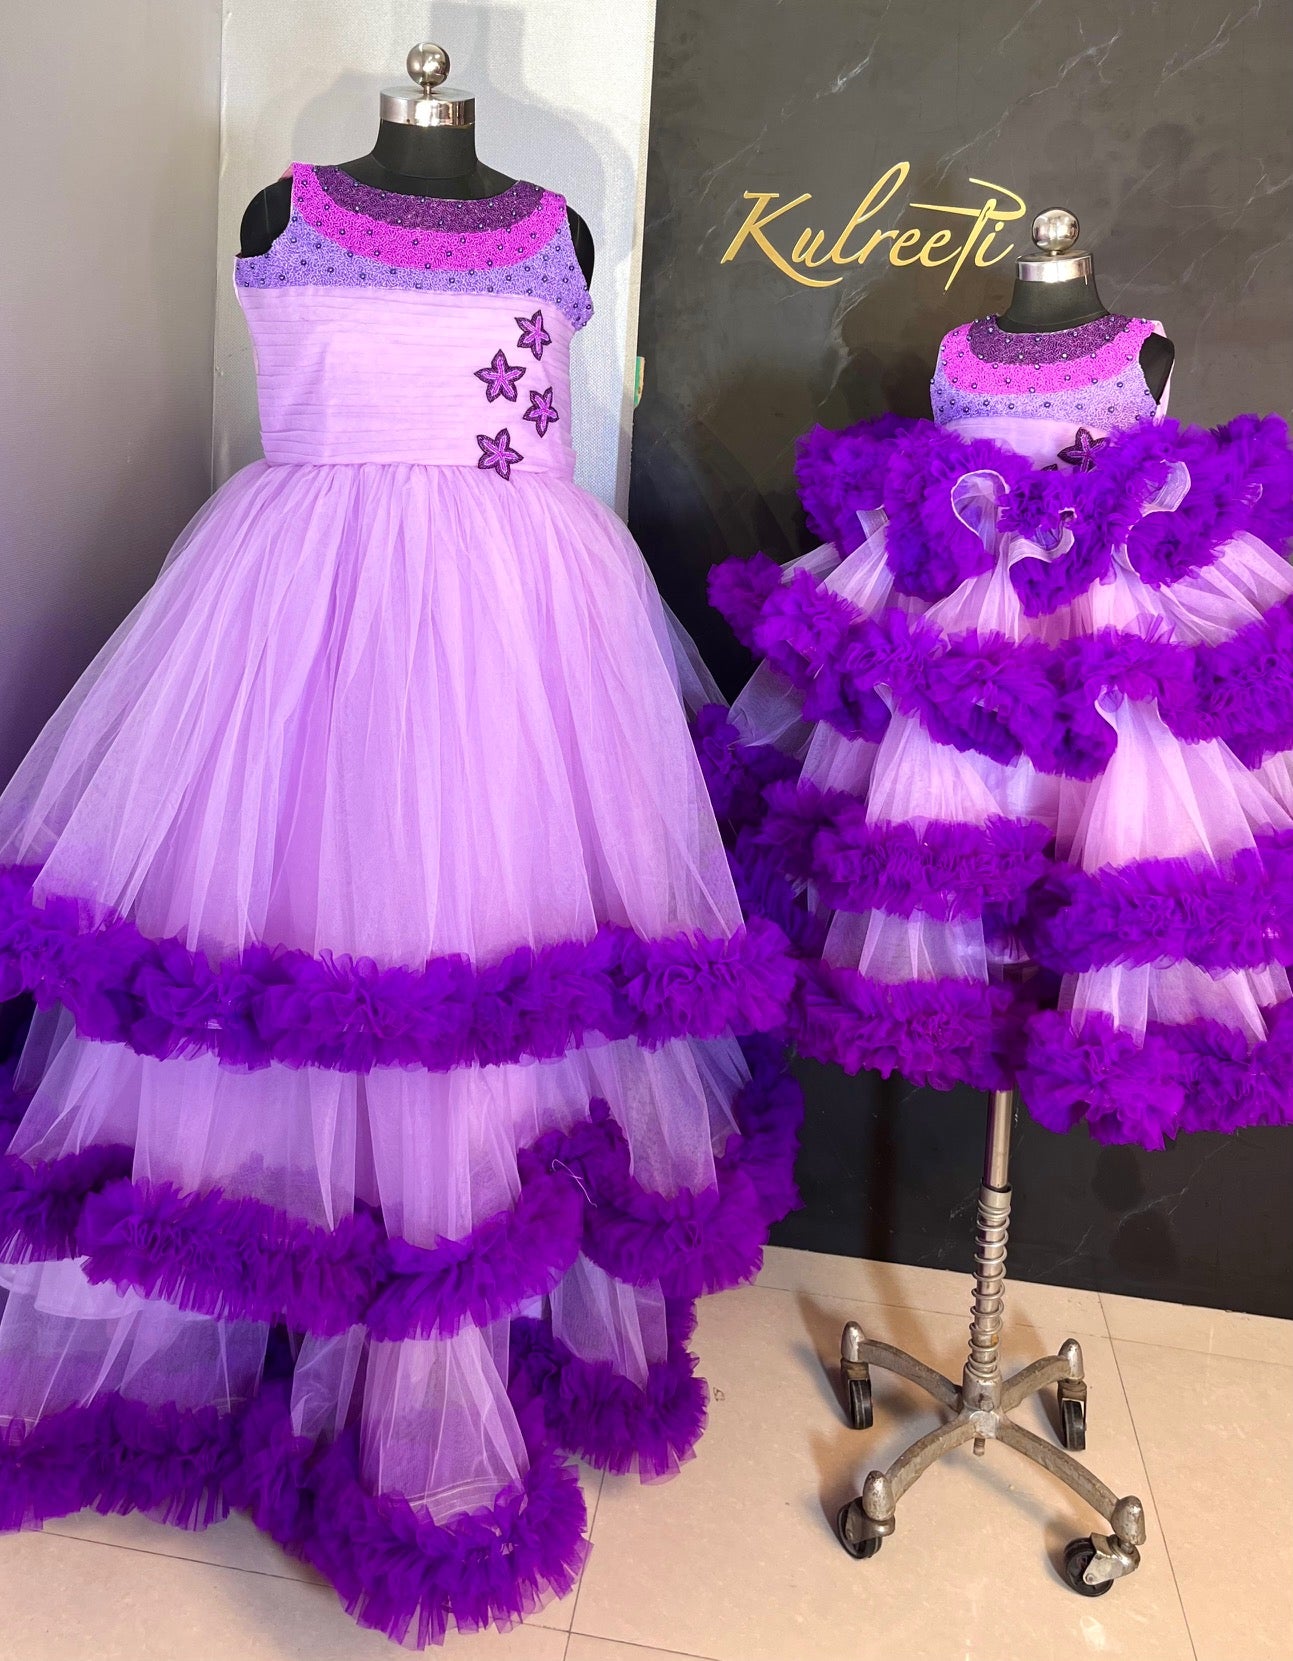 Lavender and purple color gradient gown with draped dupatta – www.liandli.in